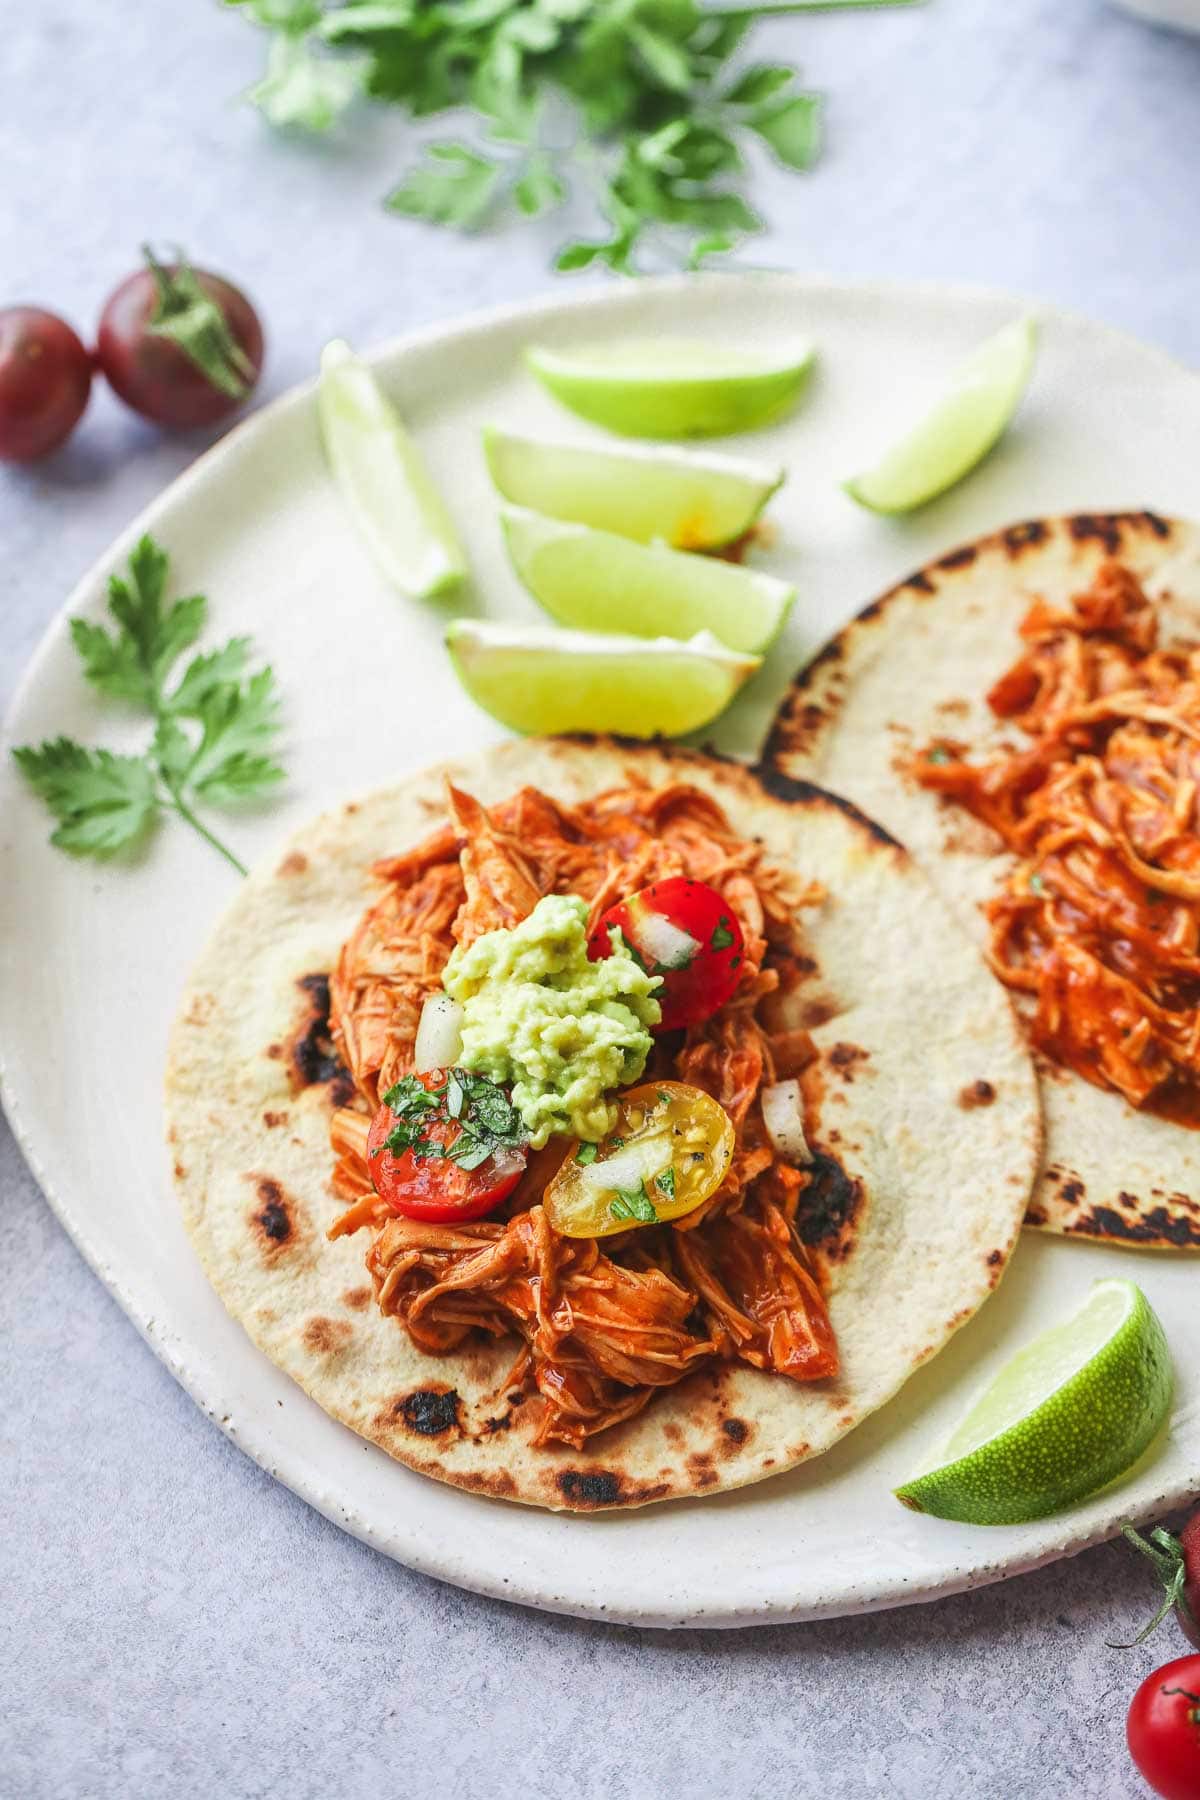 Taco filled with shredded salsa chicken made in the instant pot